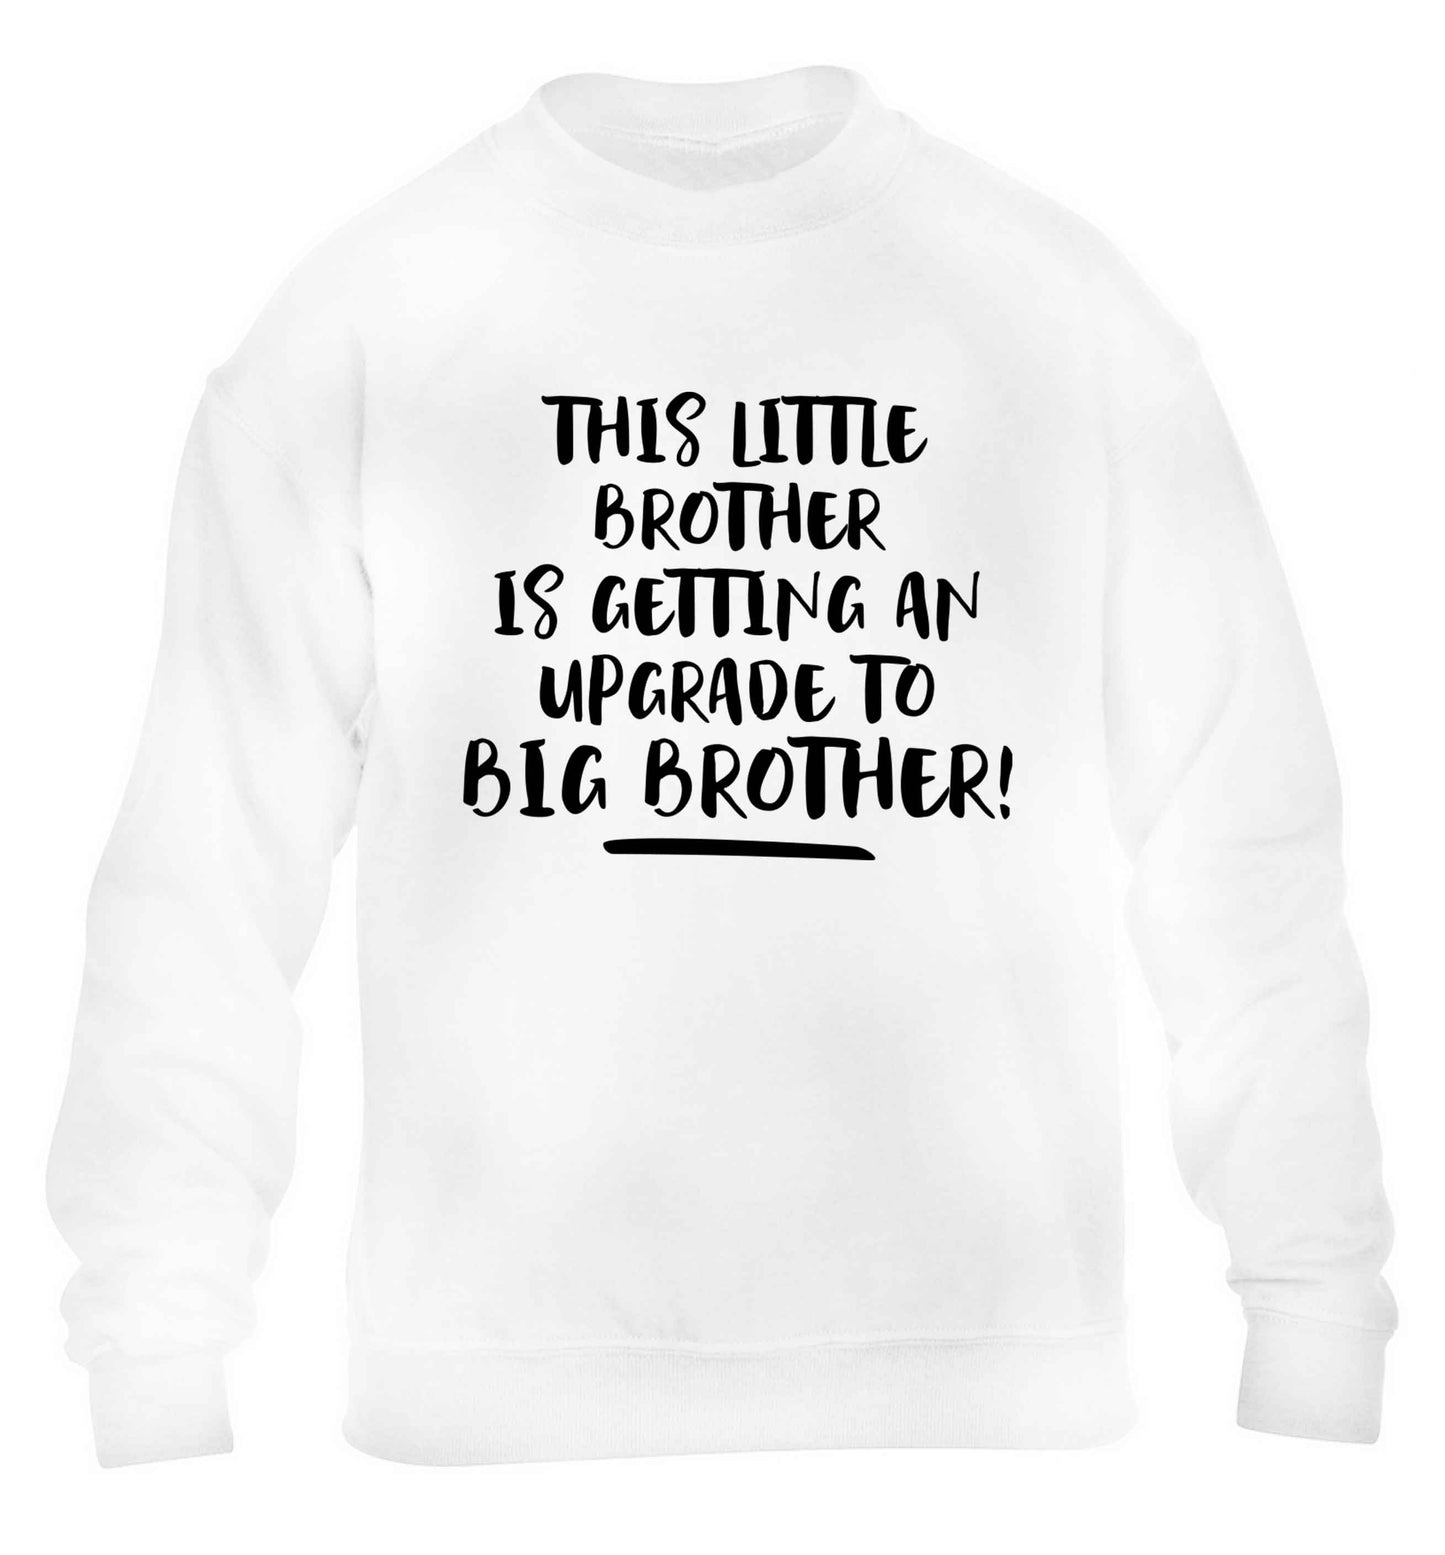 This little brother is getting an upgrade to big brother! children's white sweater 12-13 Years